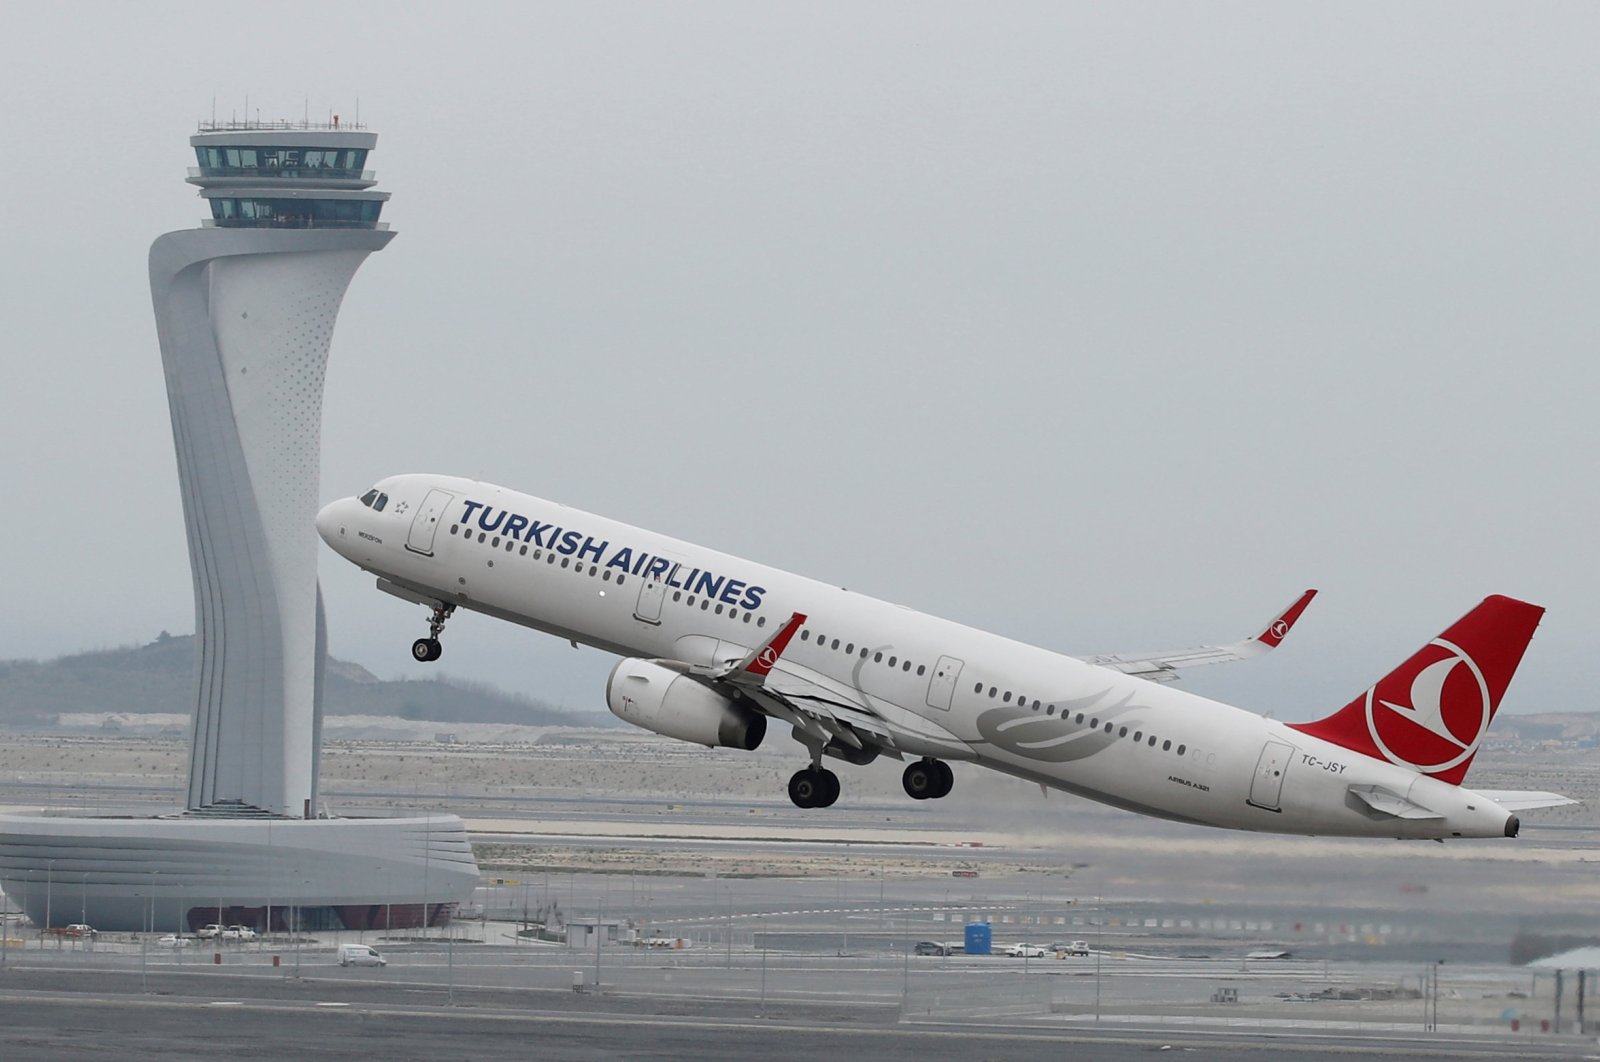 A Turkish Airlines Airbus A321-200 plane takes off from the city's new Istanbul Airport in Istanbul, Turkey, April 6, 2019. (Reuters Photo)